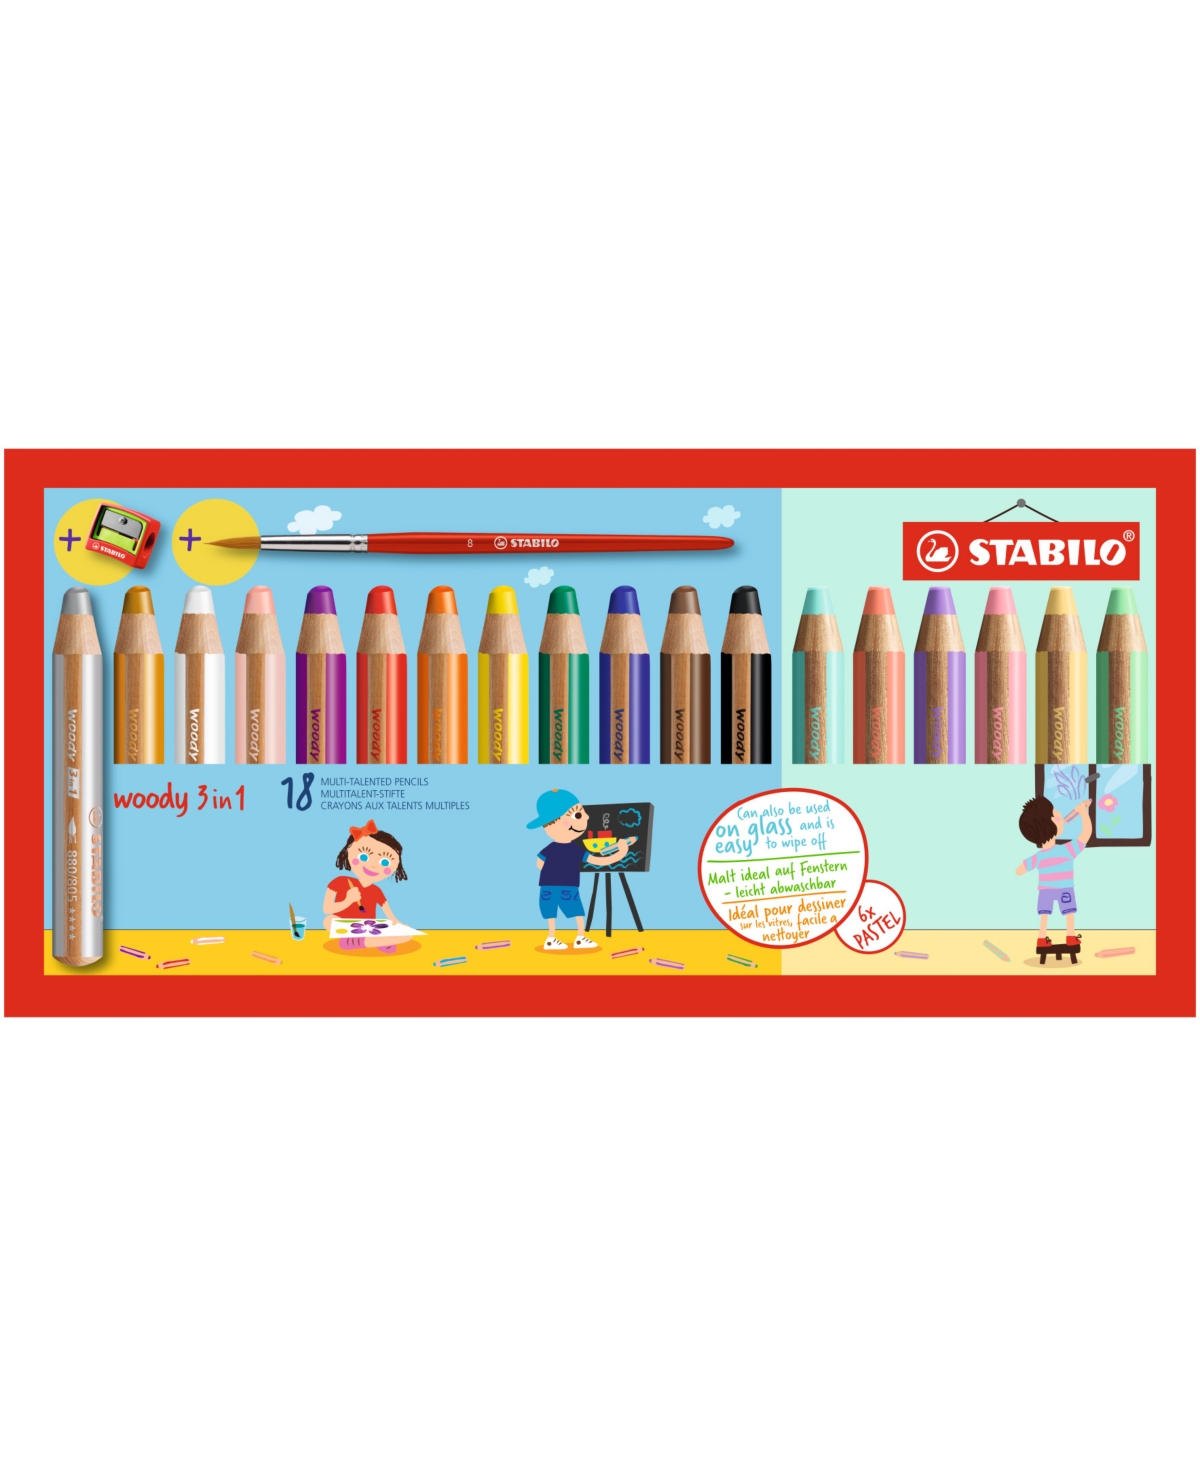 Woody 3 in 1 with Sharpener 20 Piece Color Set - Multi